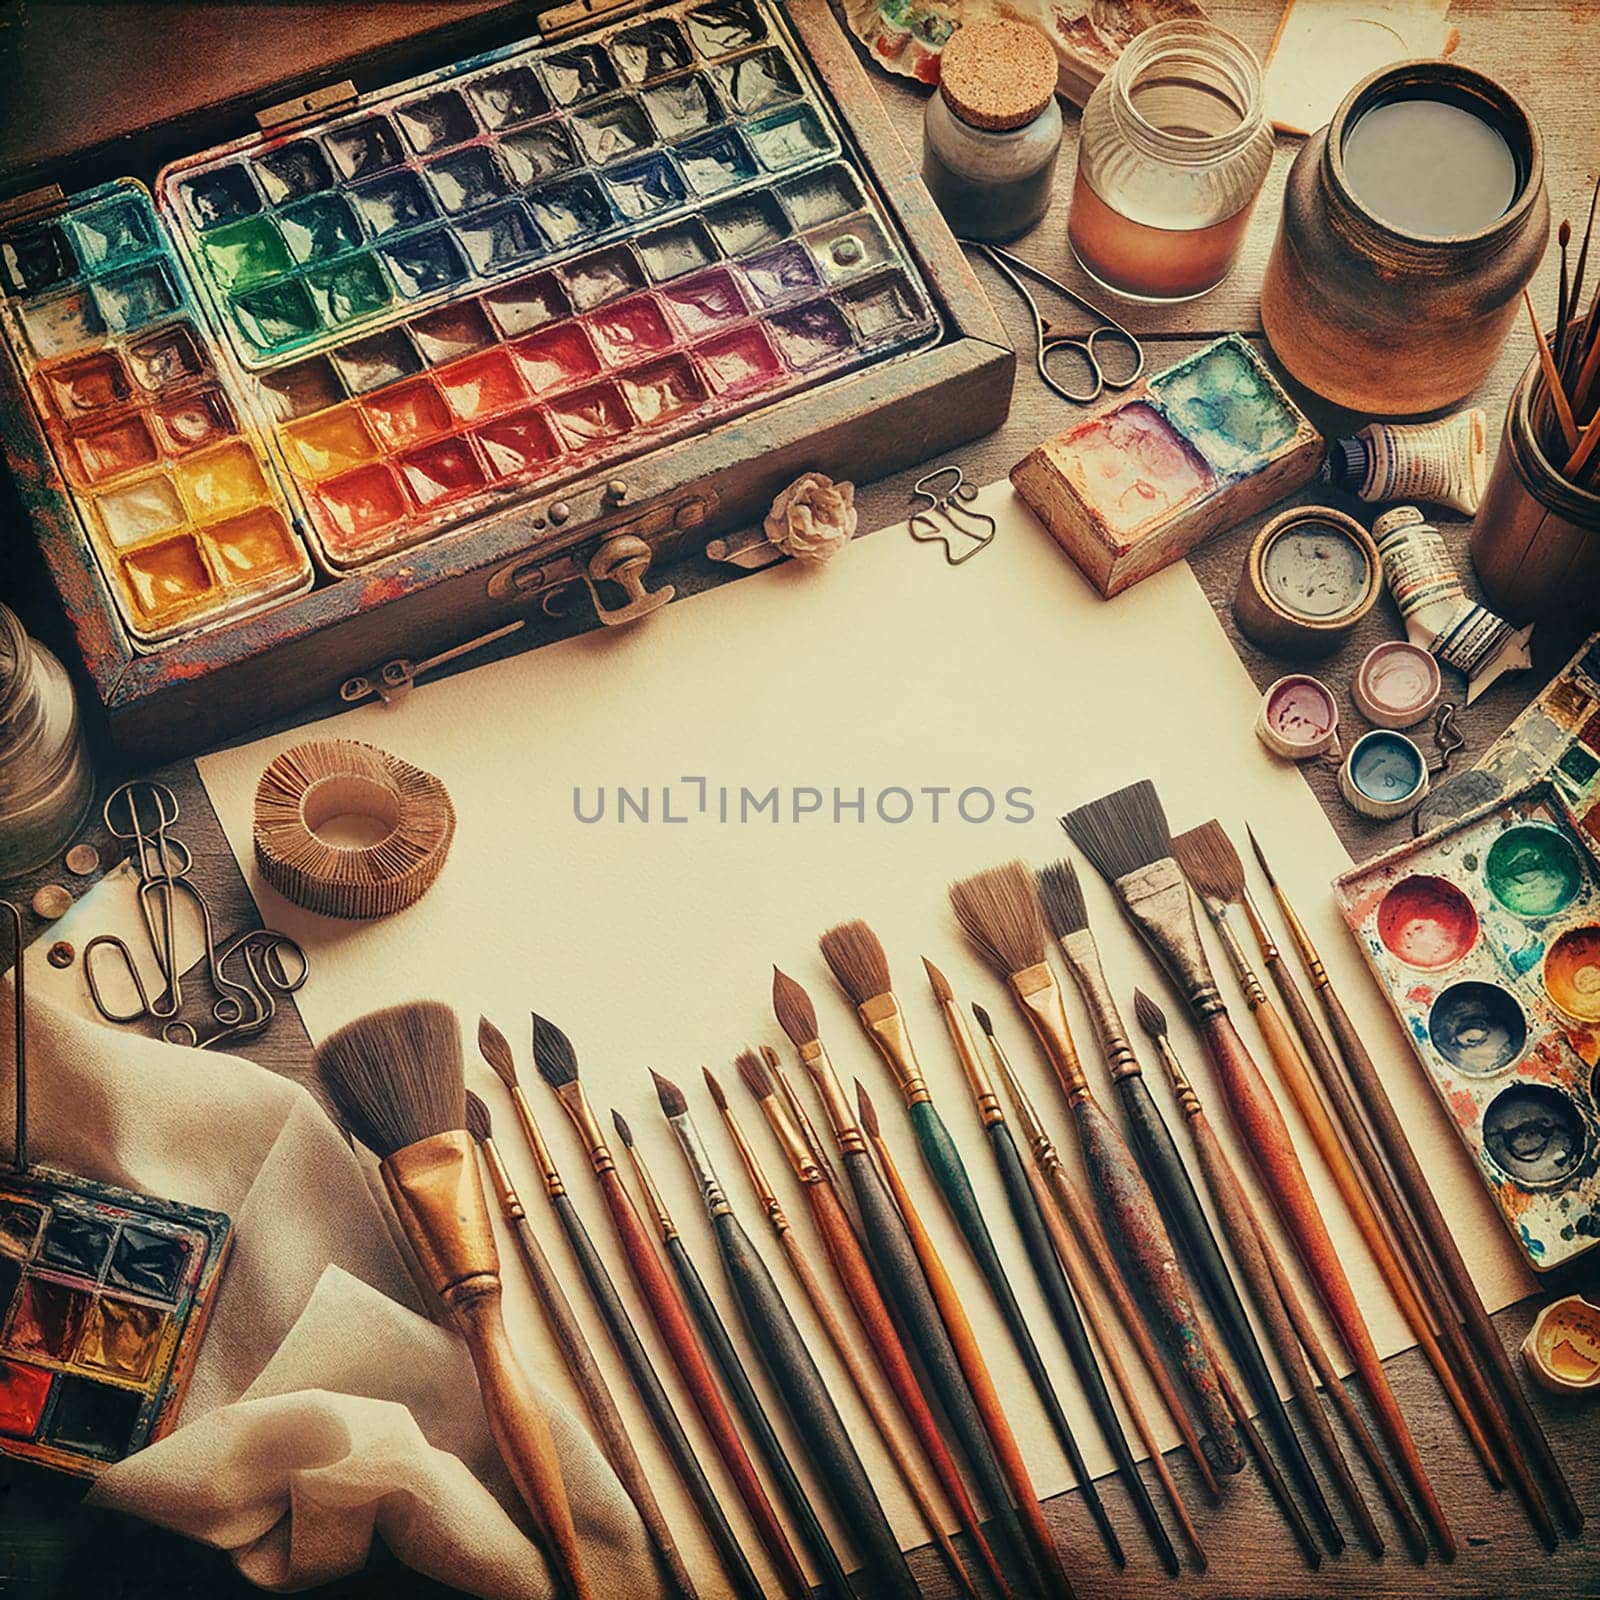 Vintage-Inspired Workspace: Artistic Mock-up with Watercolor Supplies by Petrichor